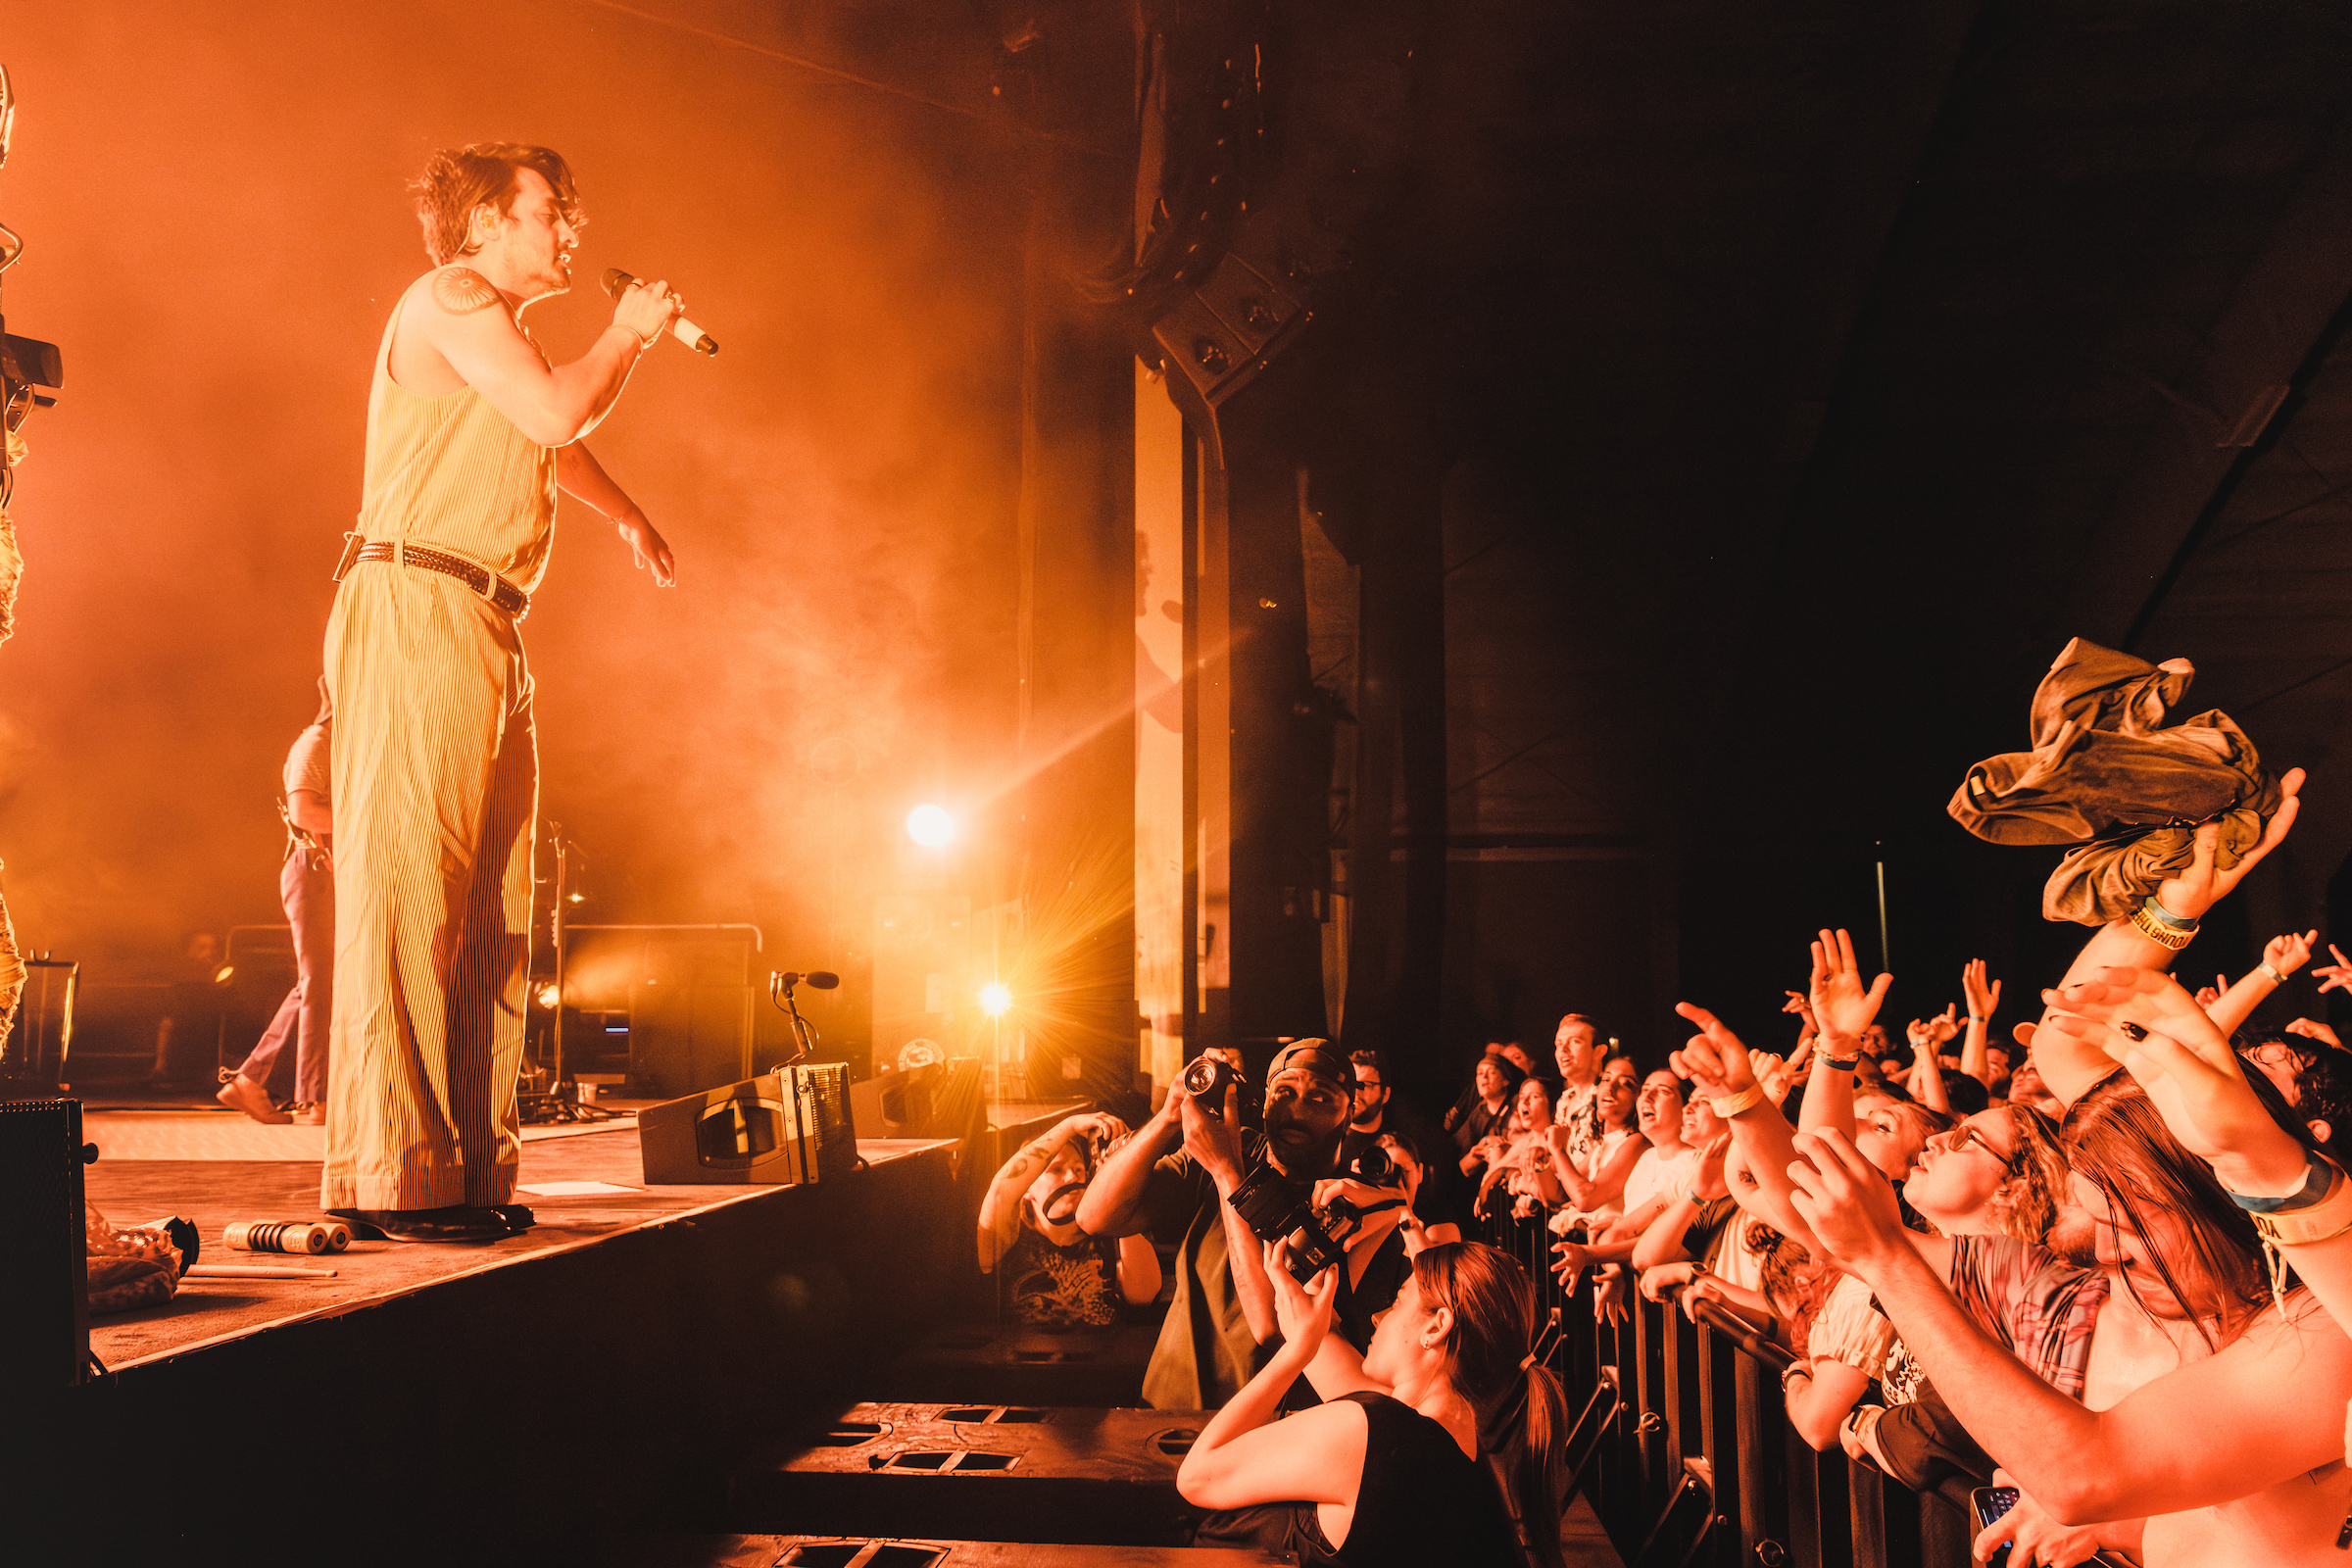 Alt-indie rockers Young the Giant did not disappoint at St. Louis Music Park in Maryland Heights, Missouri on June 24th, 2023 in support of their recent releases American Bollywood and the acoustic Both Sides EP.